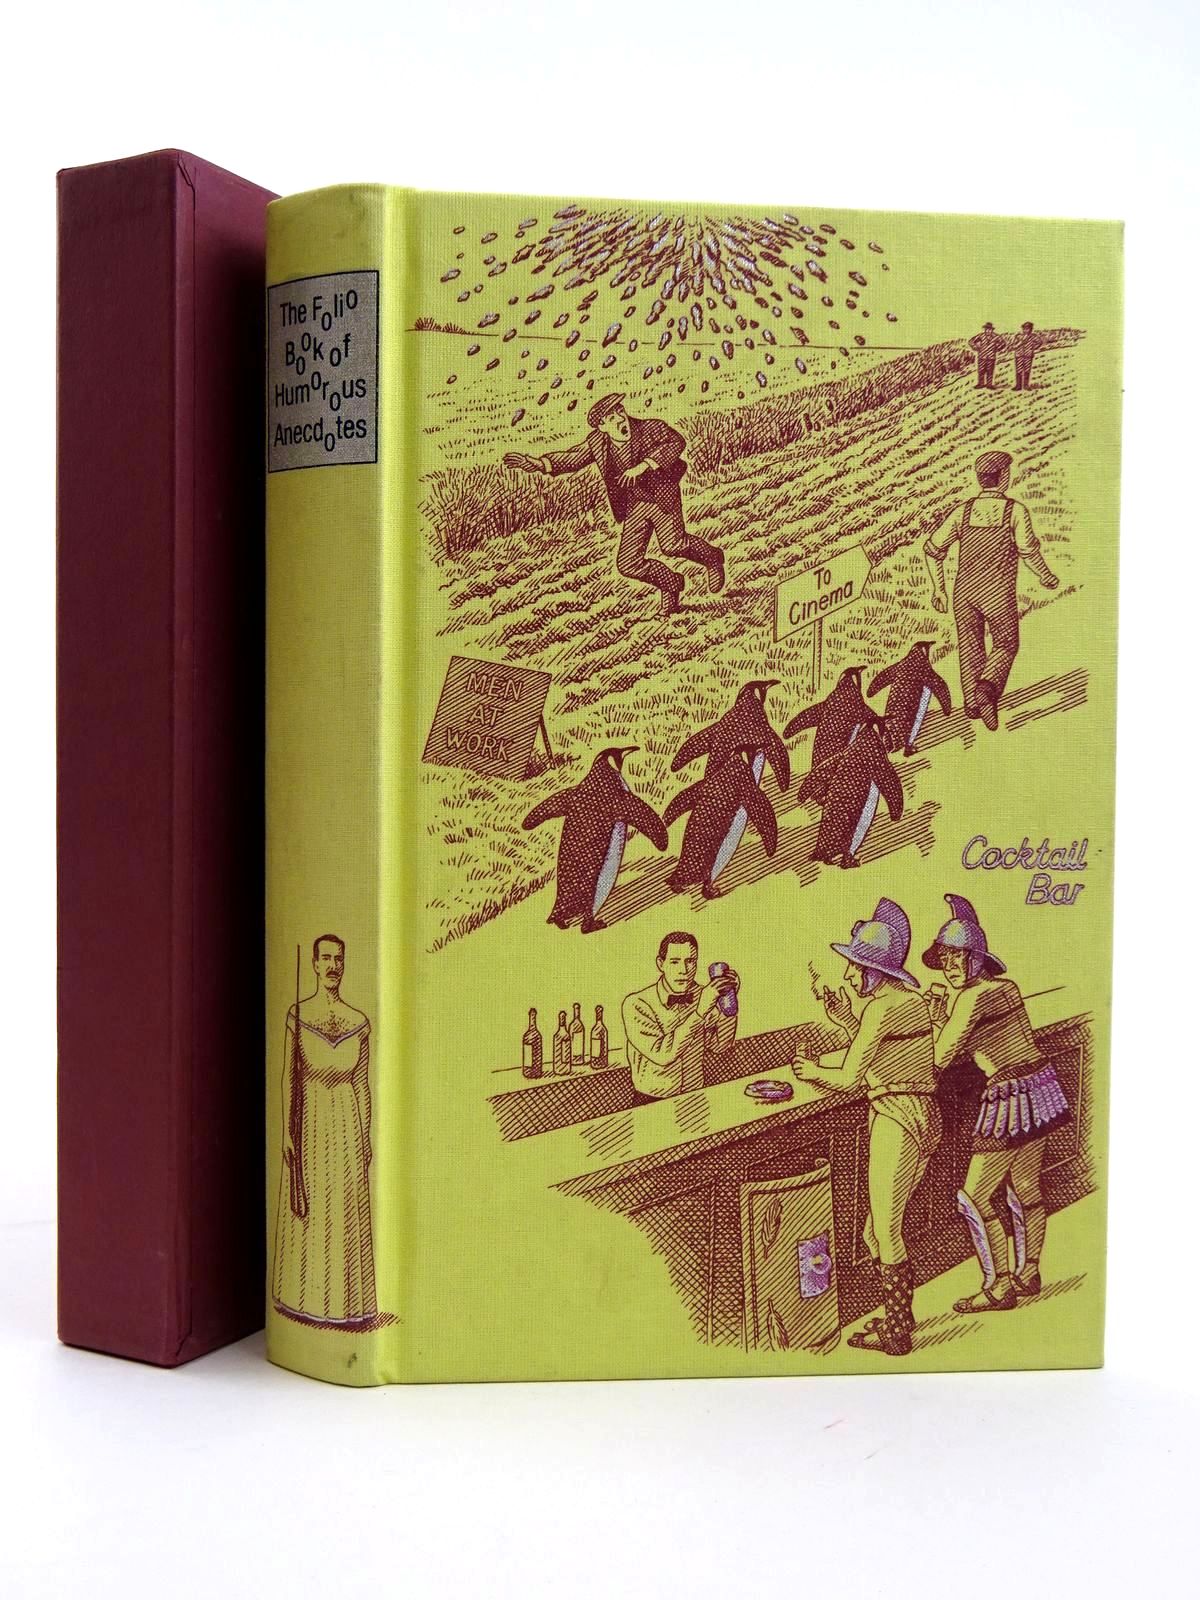 Photo of THE FOLIO BOOK OF HUMOROUS ANECDOTES written by Leeson, Edward illustrated by Hardcastle, Nick published by Folio Society (STOCK CODE: 2131644)  for sale by Stella & Rose's Books